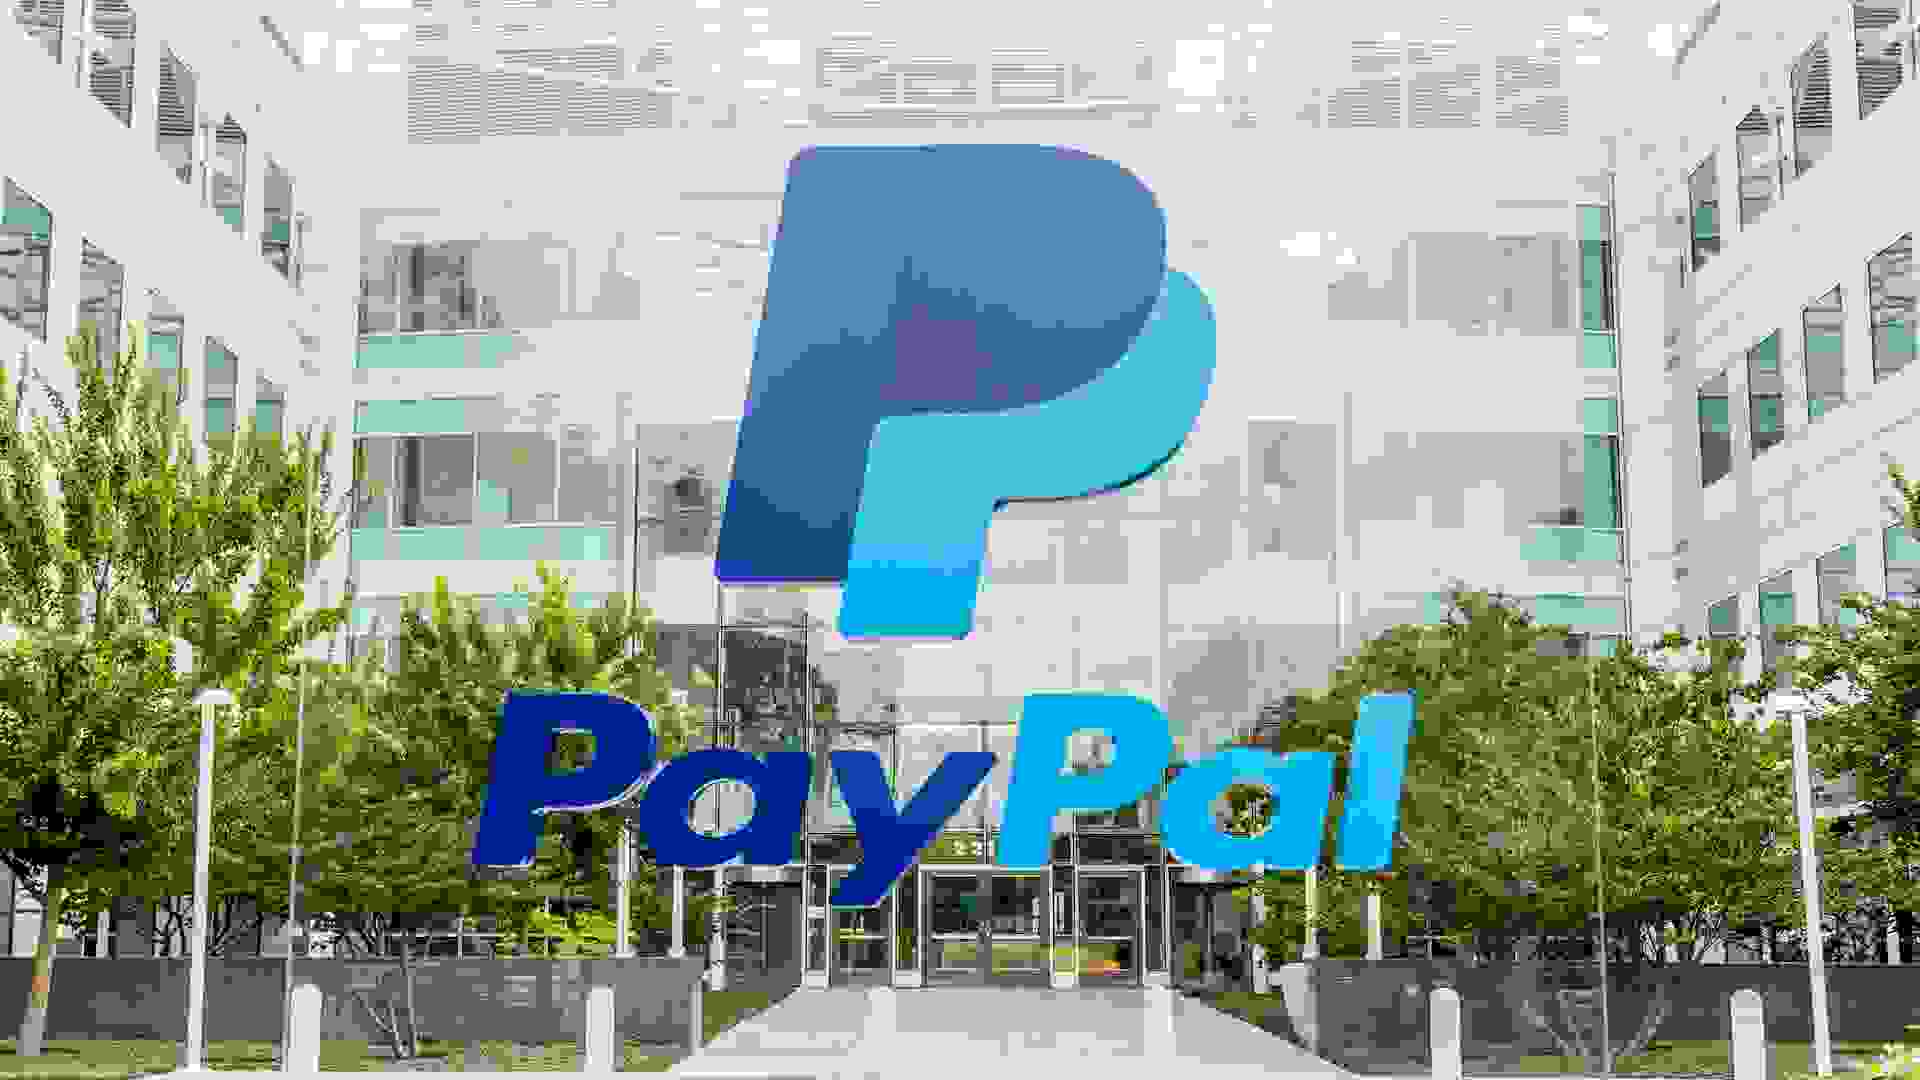 San Jose, USA - October 15, 2015: PayPal headquarters located at 2221 N.